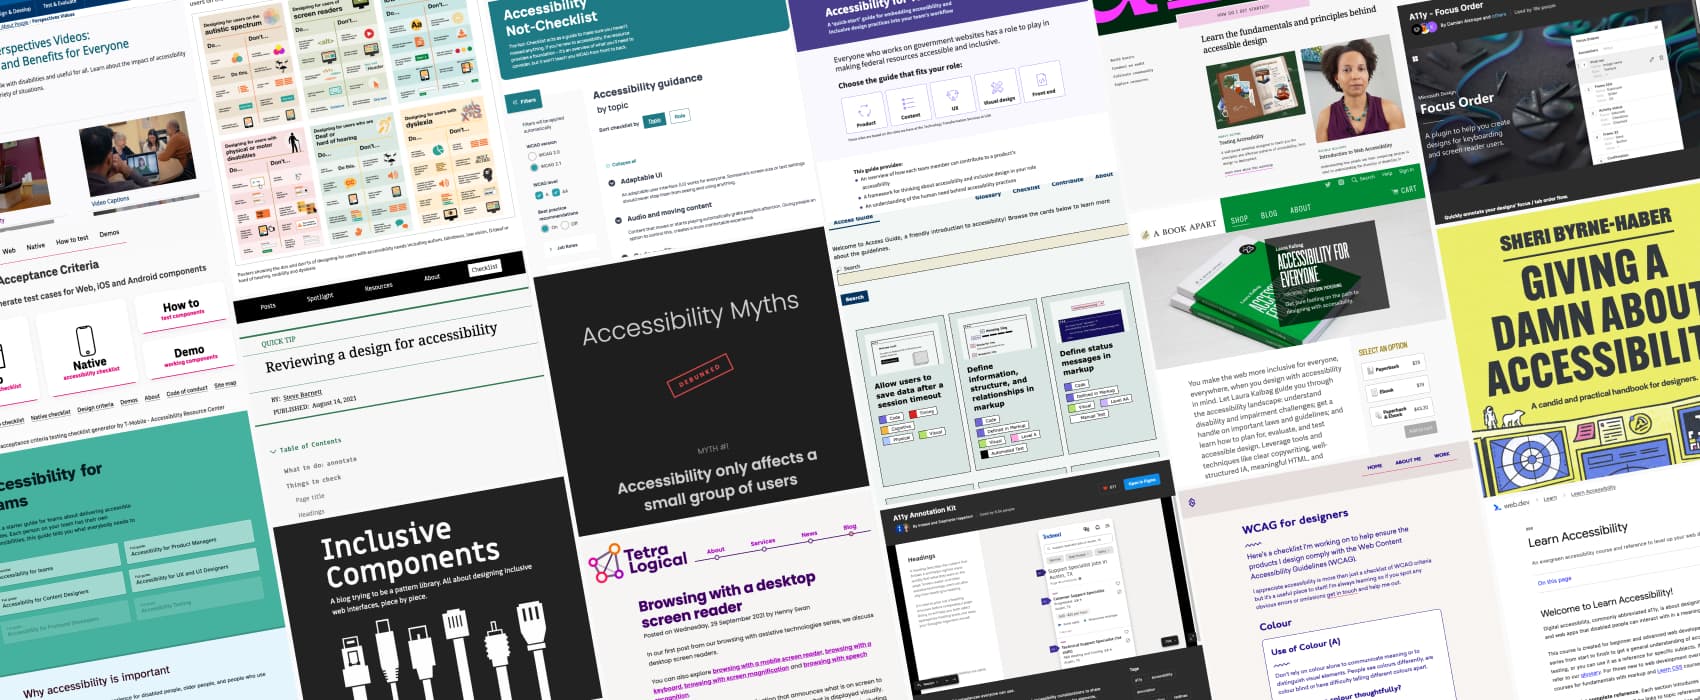 Accessibility for designer: where do I start? by Stéphanie Walter - UX Researcher & Designer.